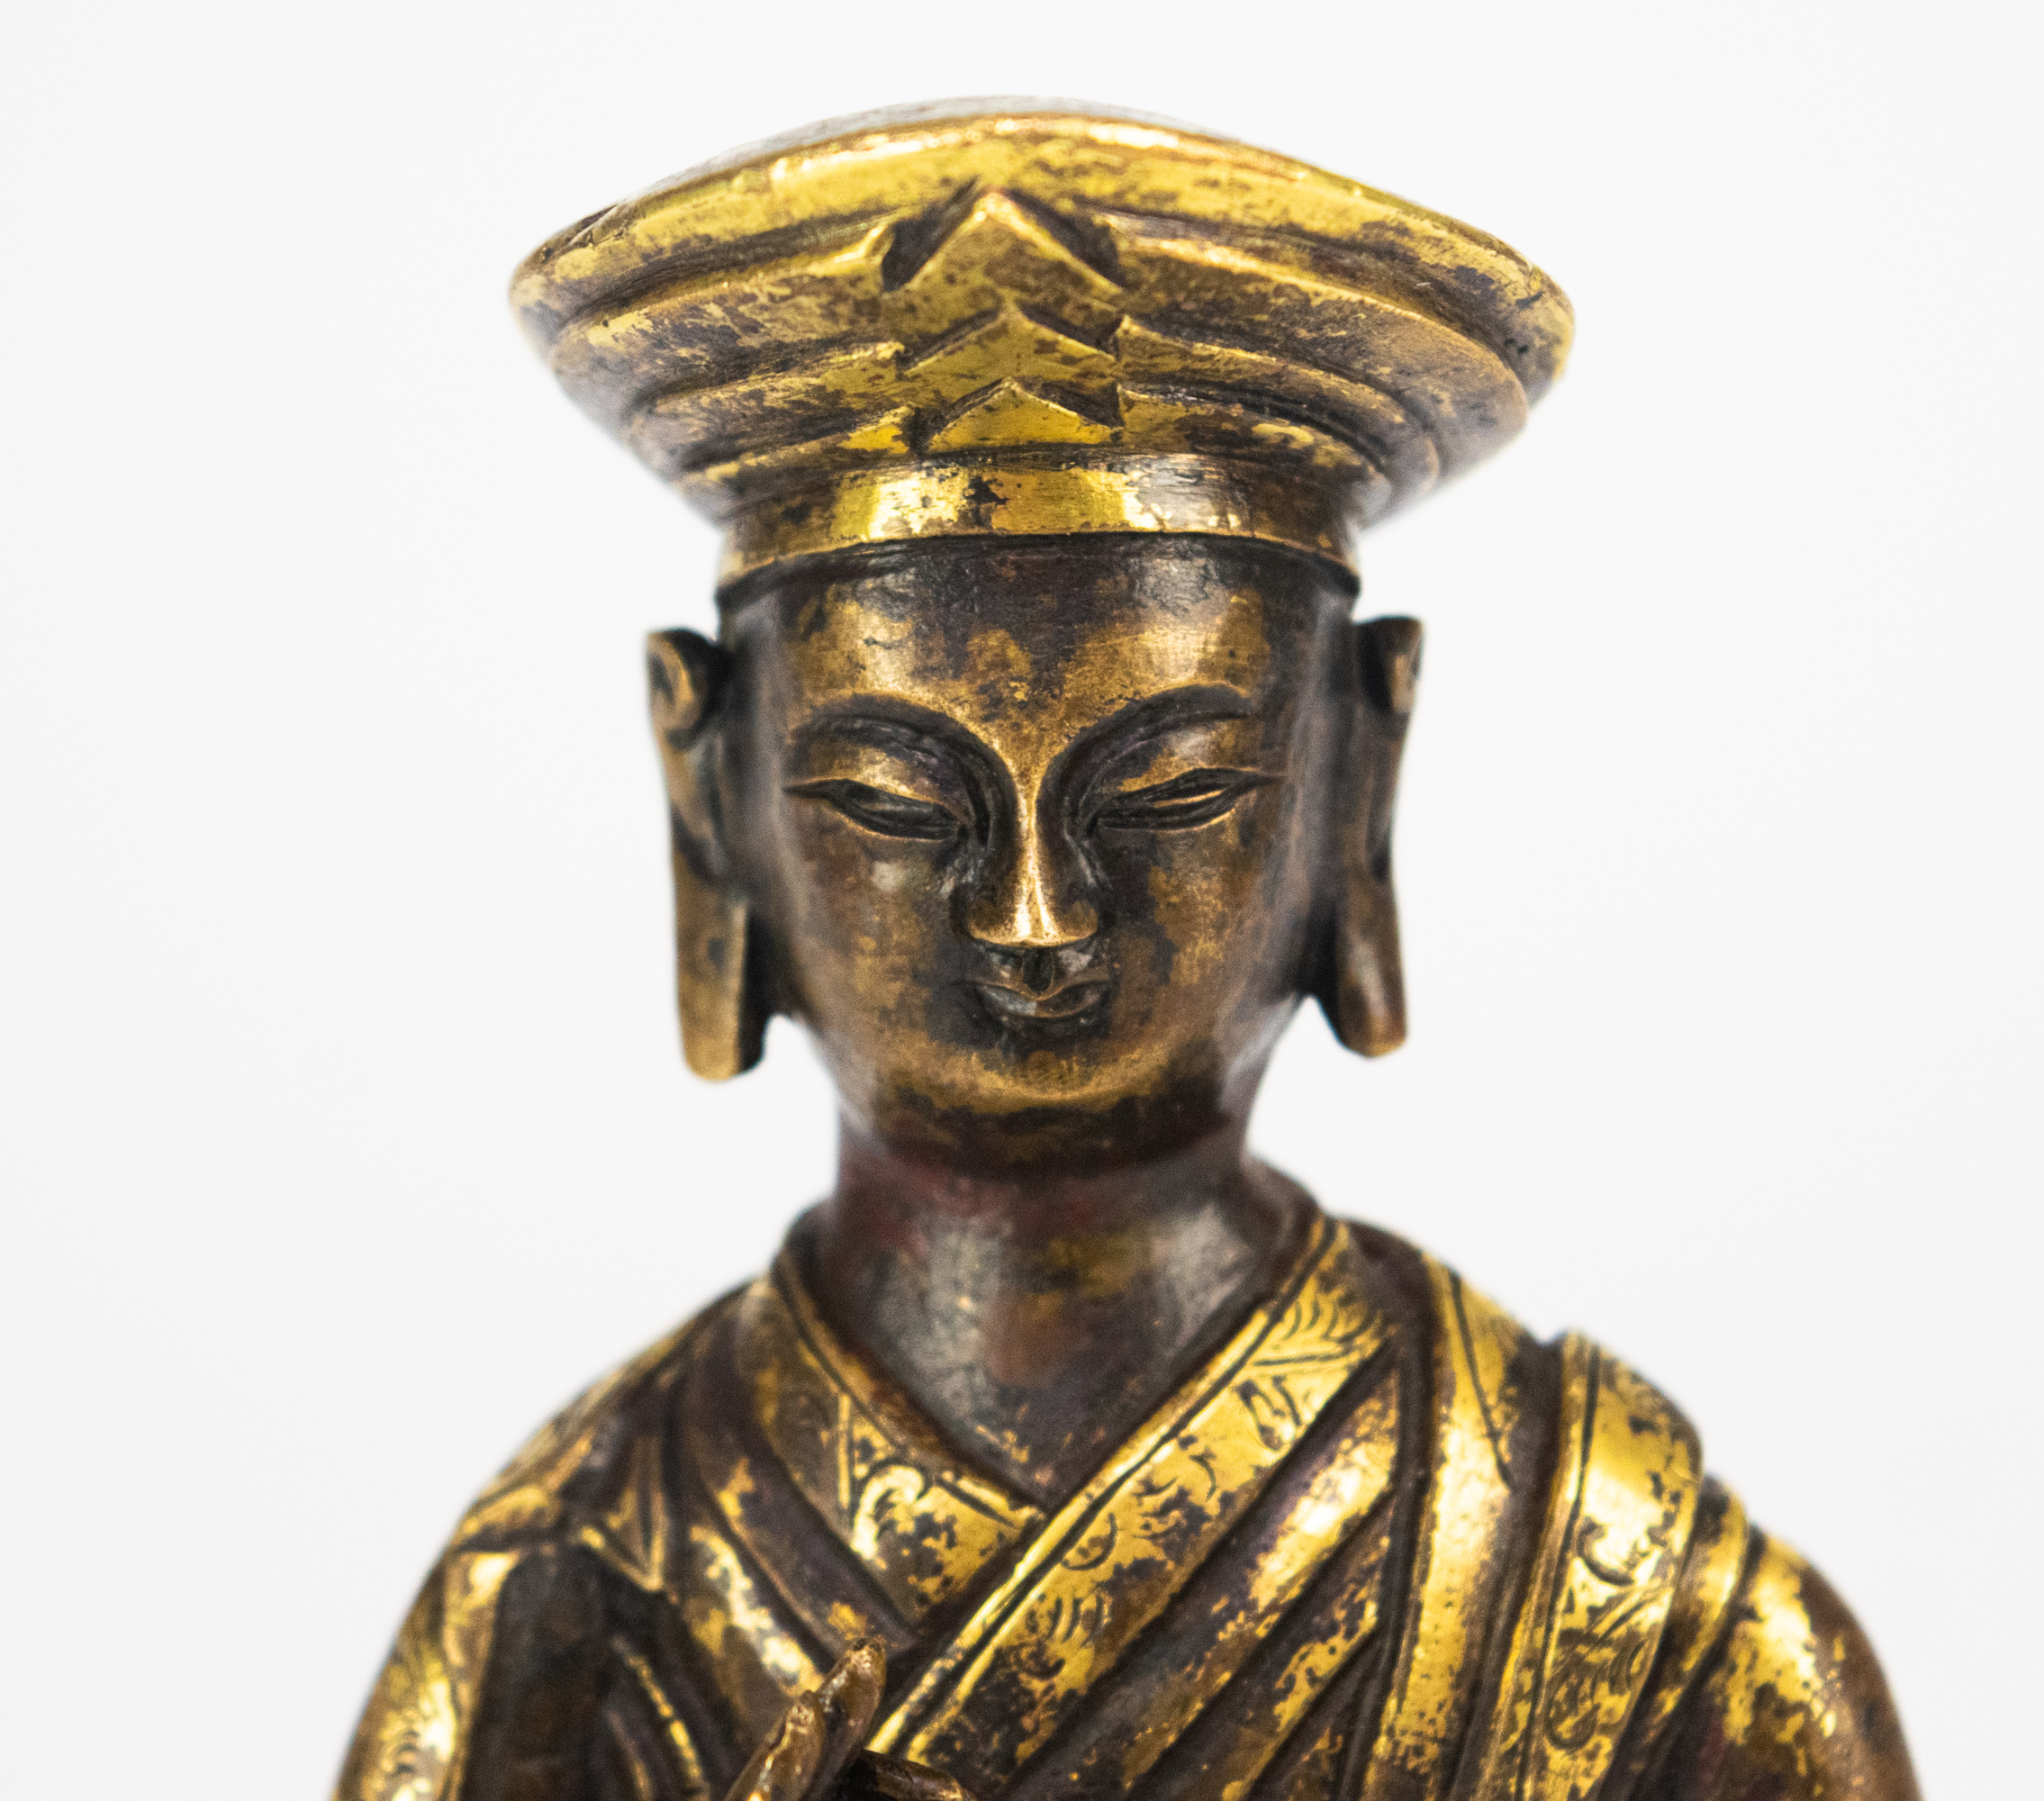 Chinese Gilt Bronze Figure of Lama, Qing Dynasty - Image 5 of 8